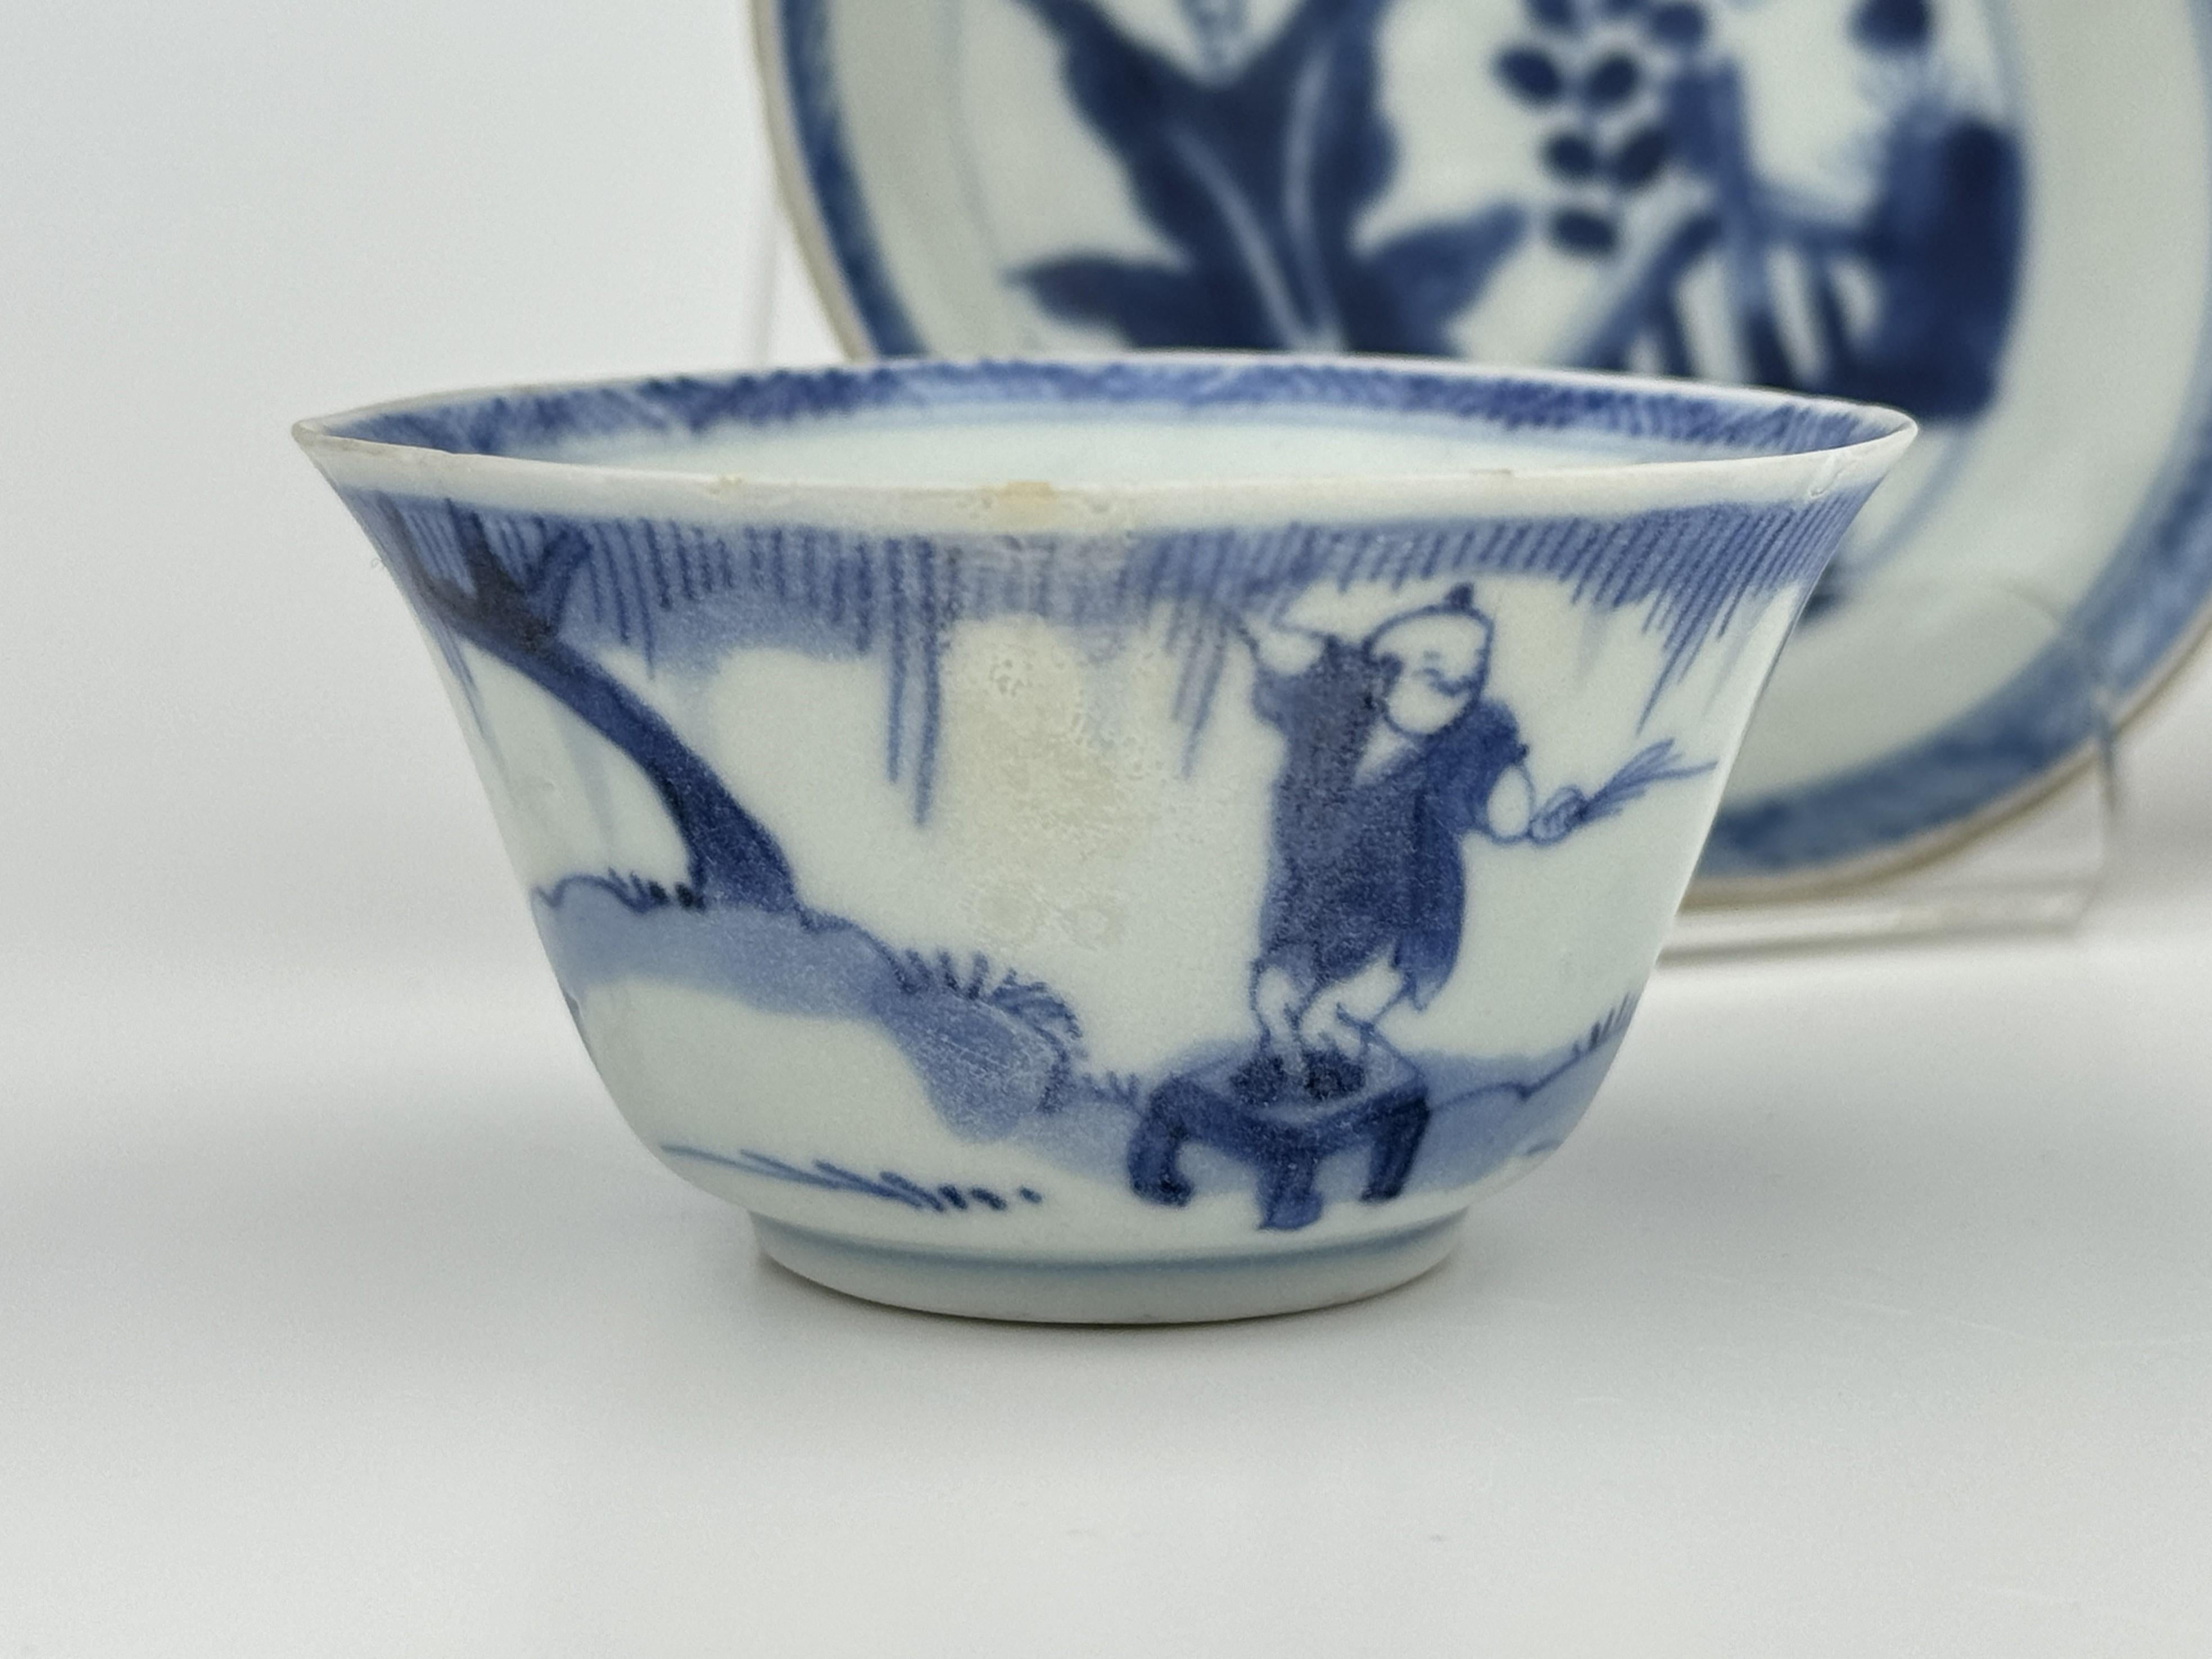 Blue and White Tea Set c 1725, Qing Dynasty, Yongzheng Reign For Sale 1